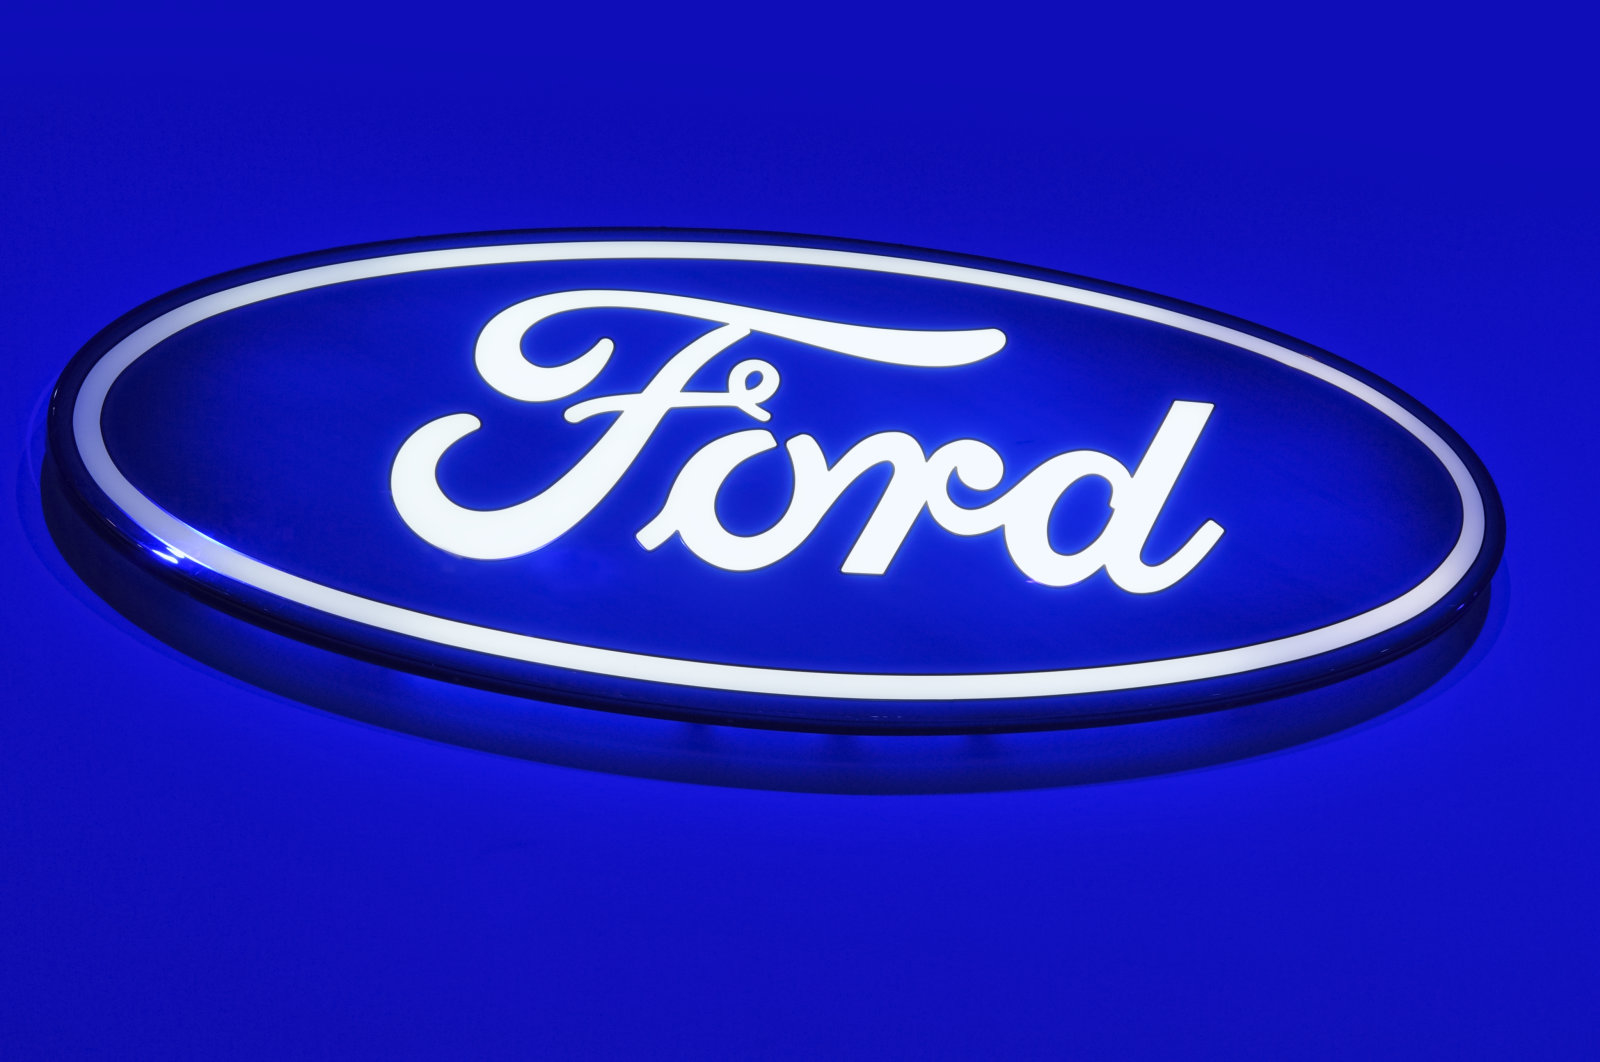 EVs will be built by Ford with Chinese automaker in a deal